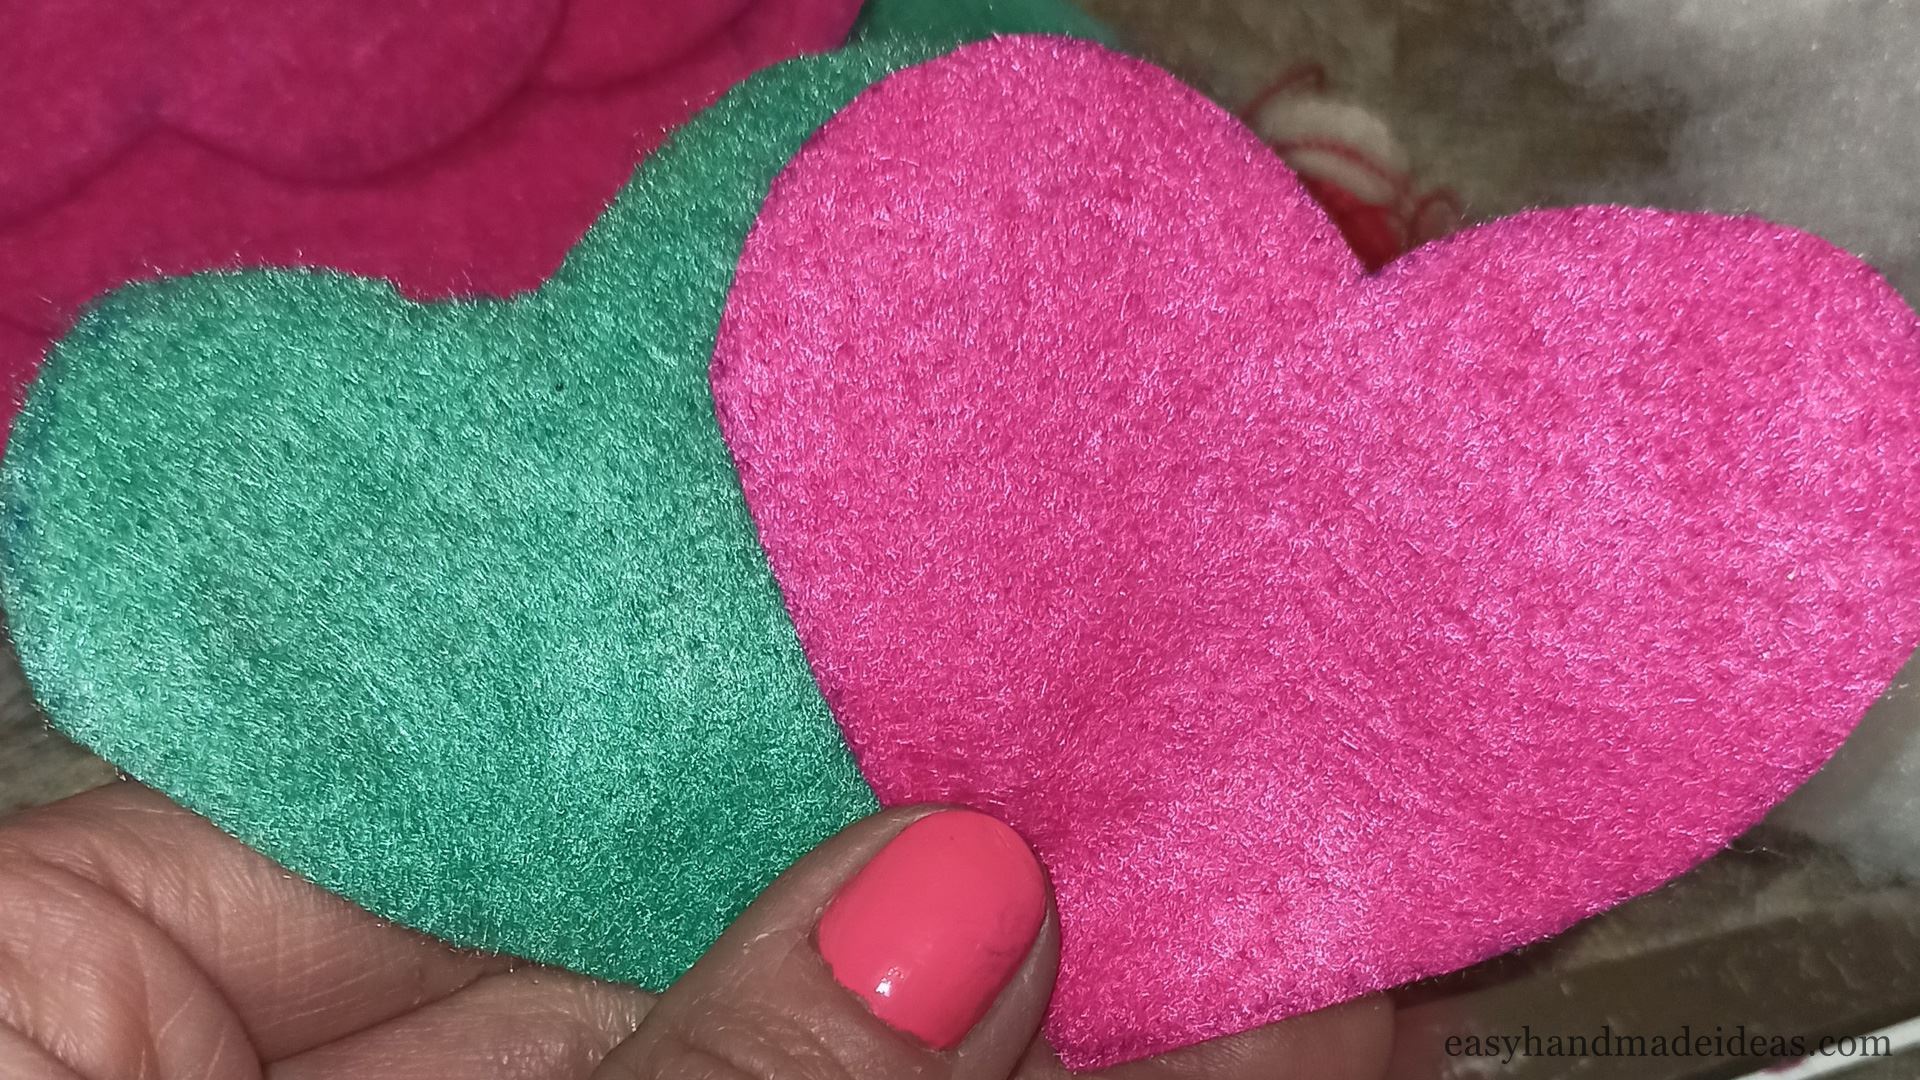 Cut out the hearts from the felt